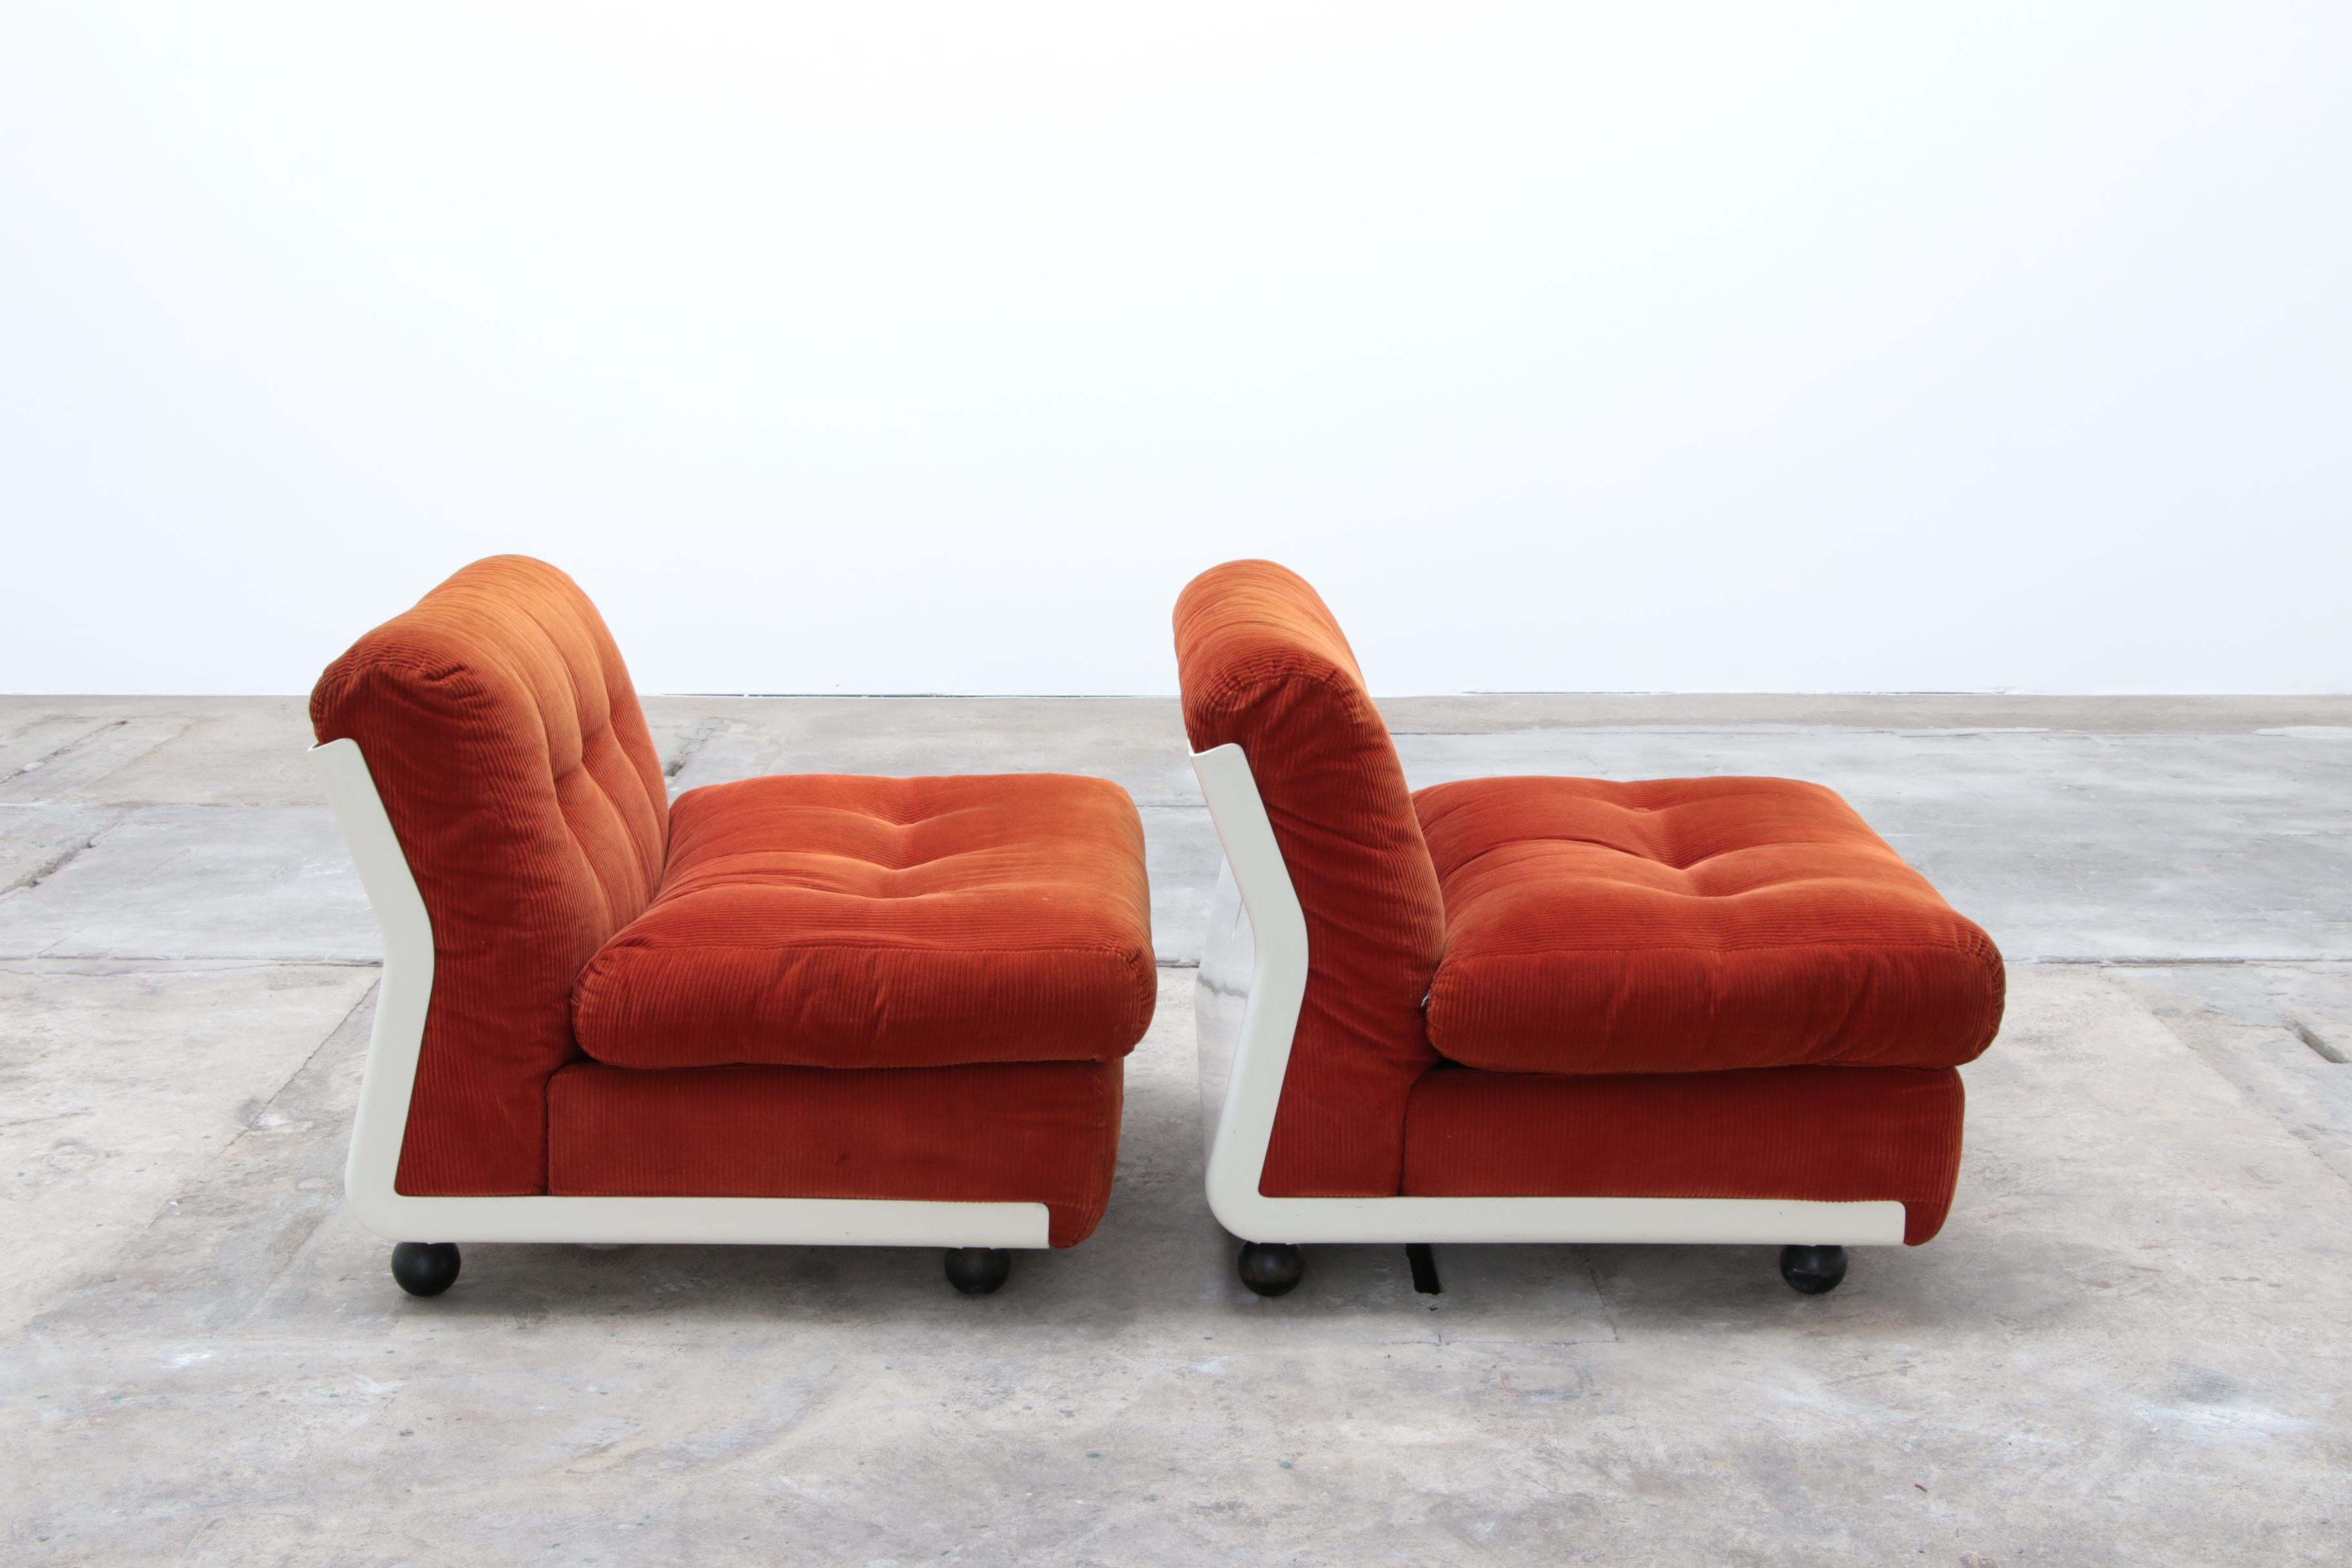 Mid-20th Century Amanta Lounge chairs by Mario Bellini for C&B Italy, 1963